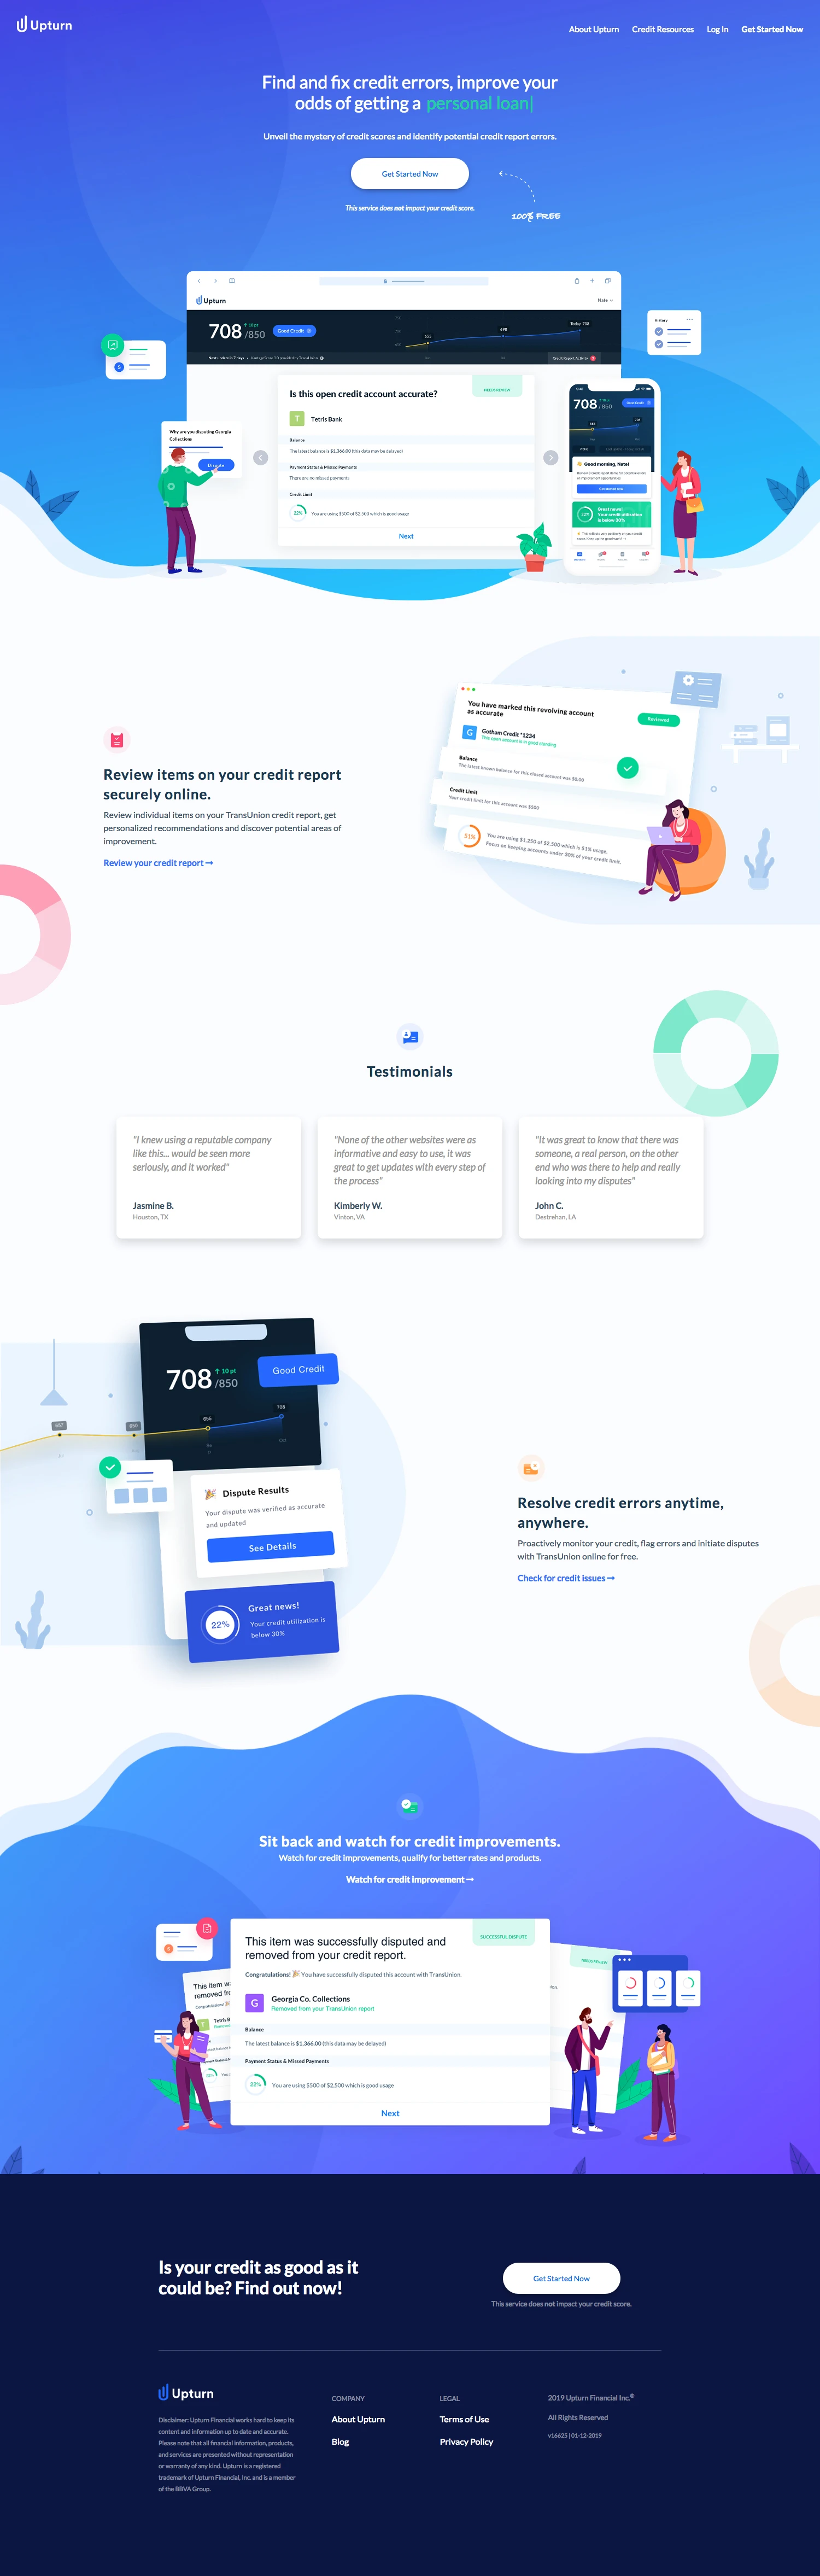 Upturn Landing Page Example: We believe credit and personal finances are unnecessarily complex. Upturn's digital service and online financial tools help you get the most out of your credit.